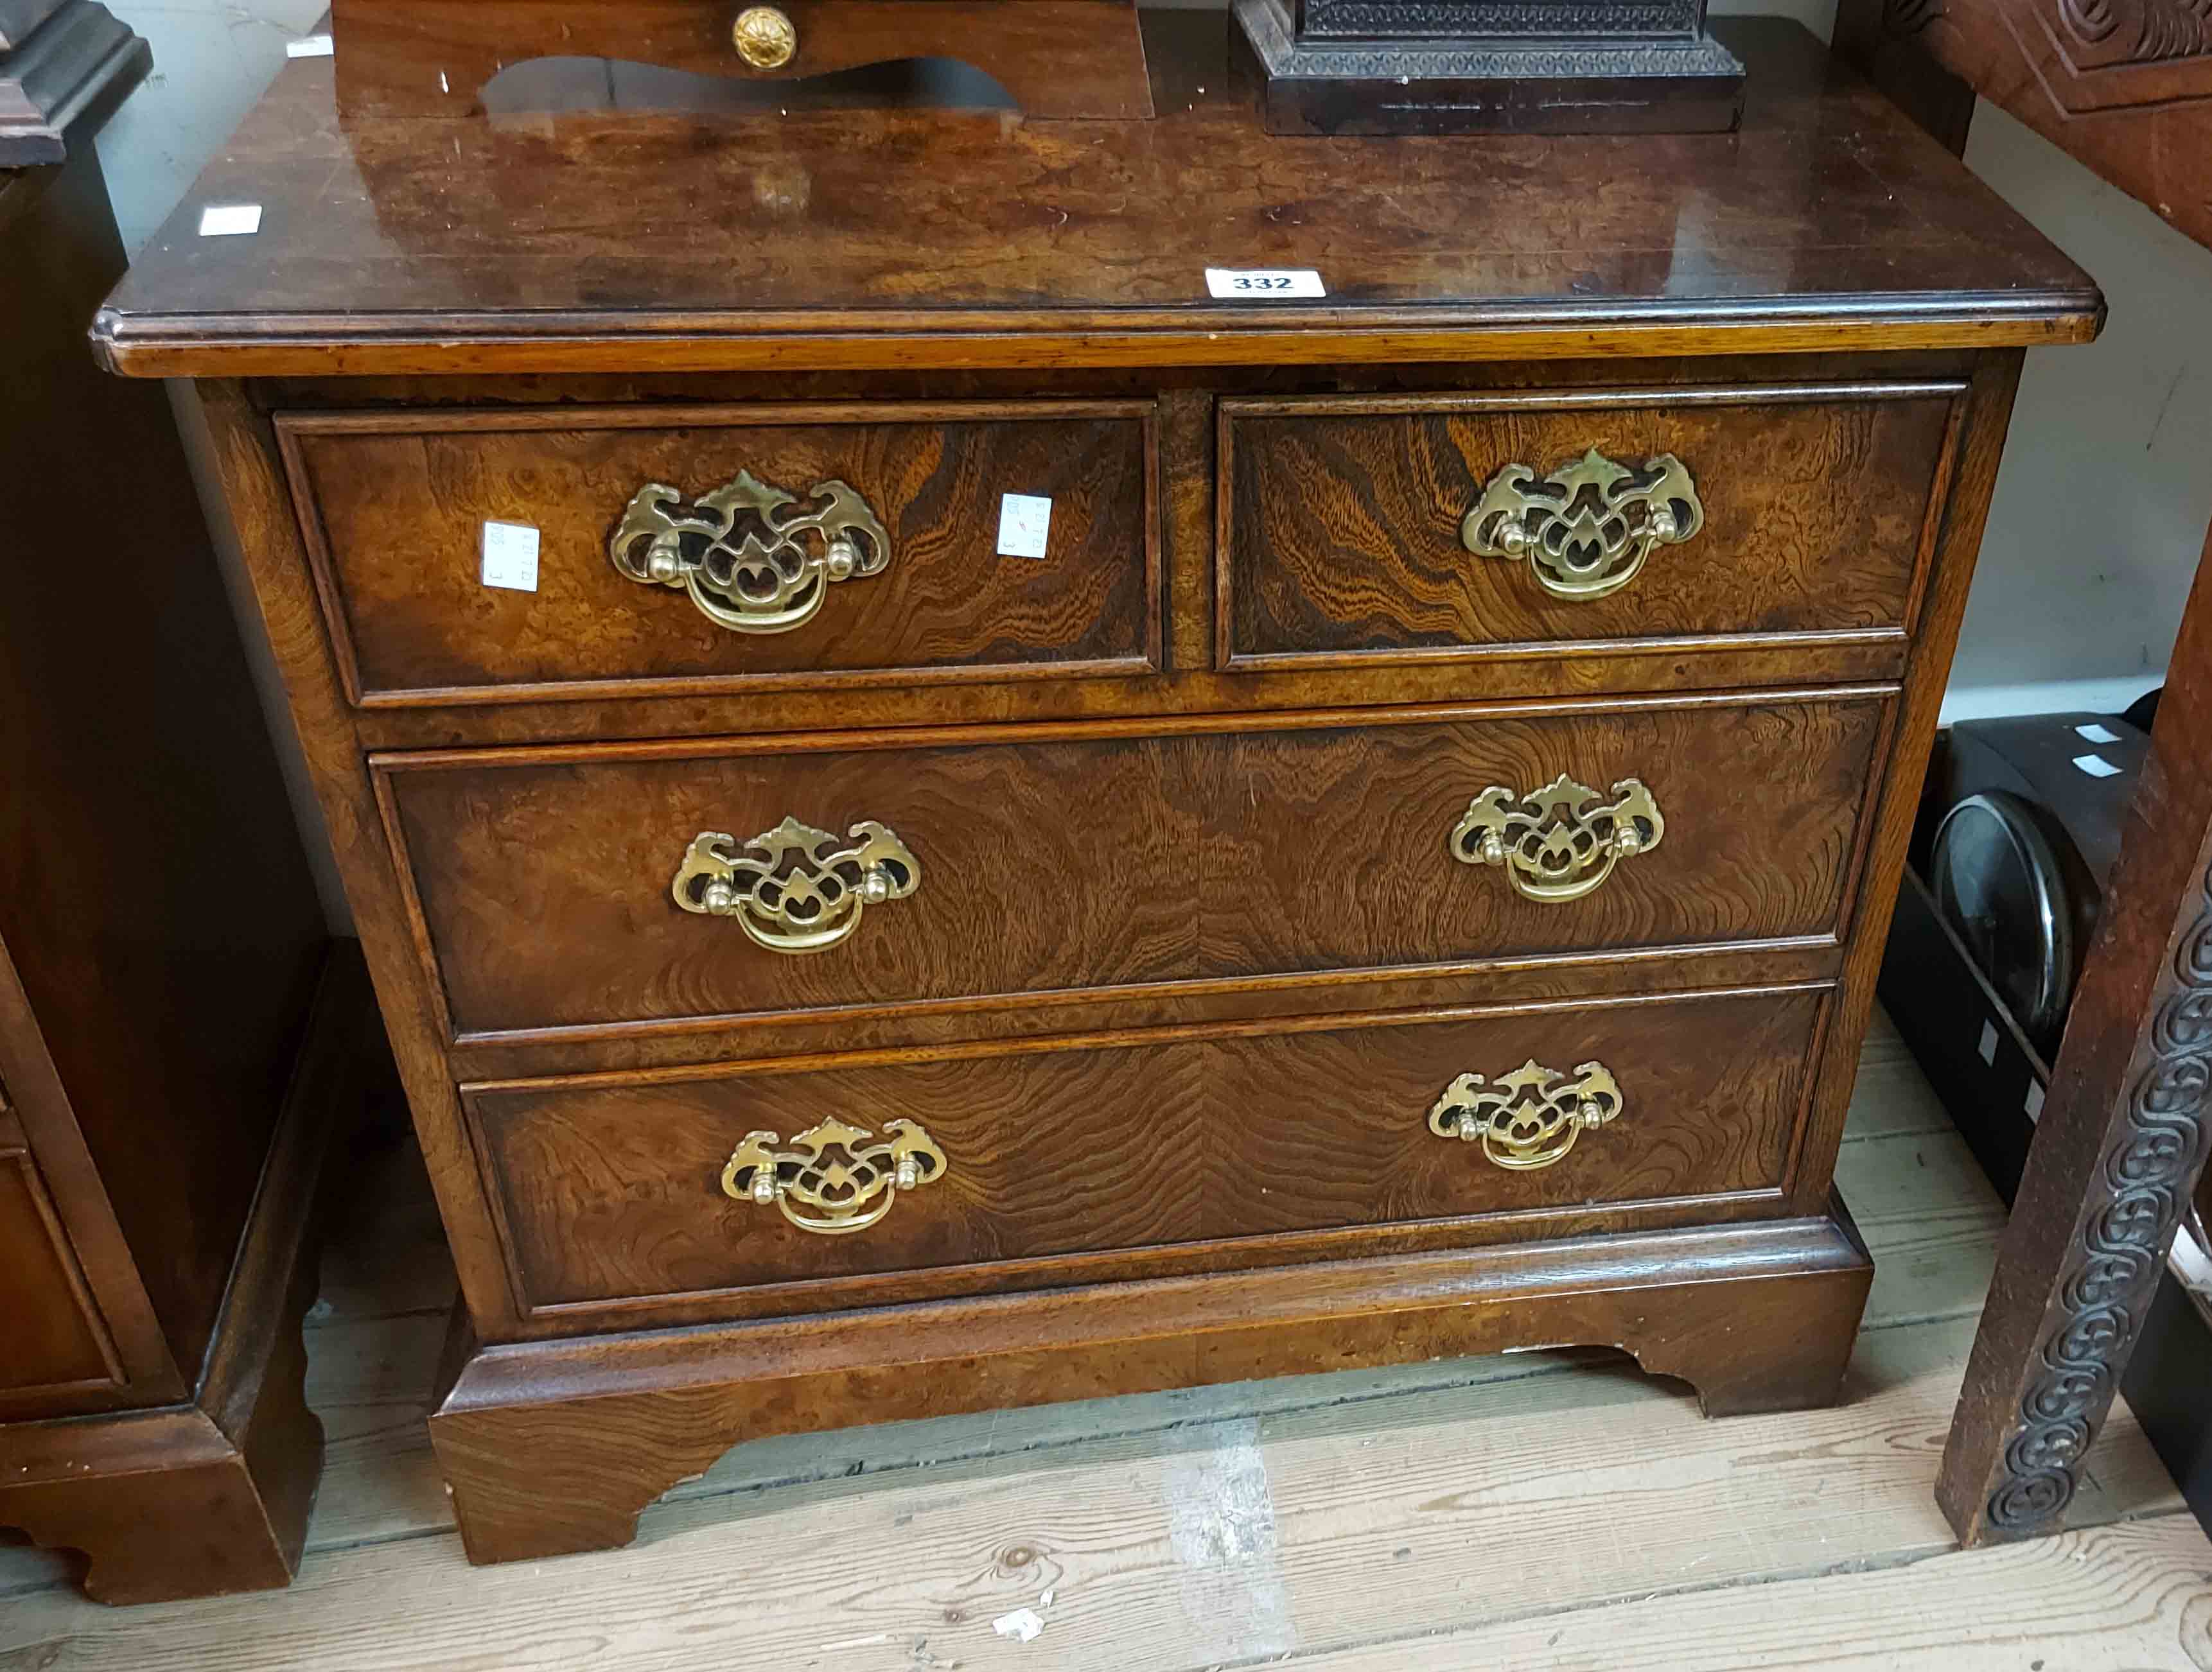 A 66cm reproduction burr walnut quarter veneered low chest of two short and two long drawers with